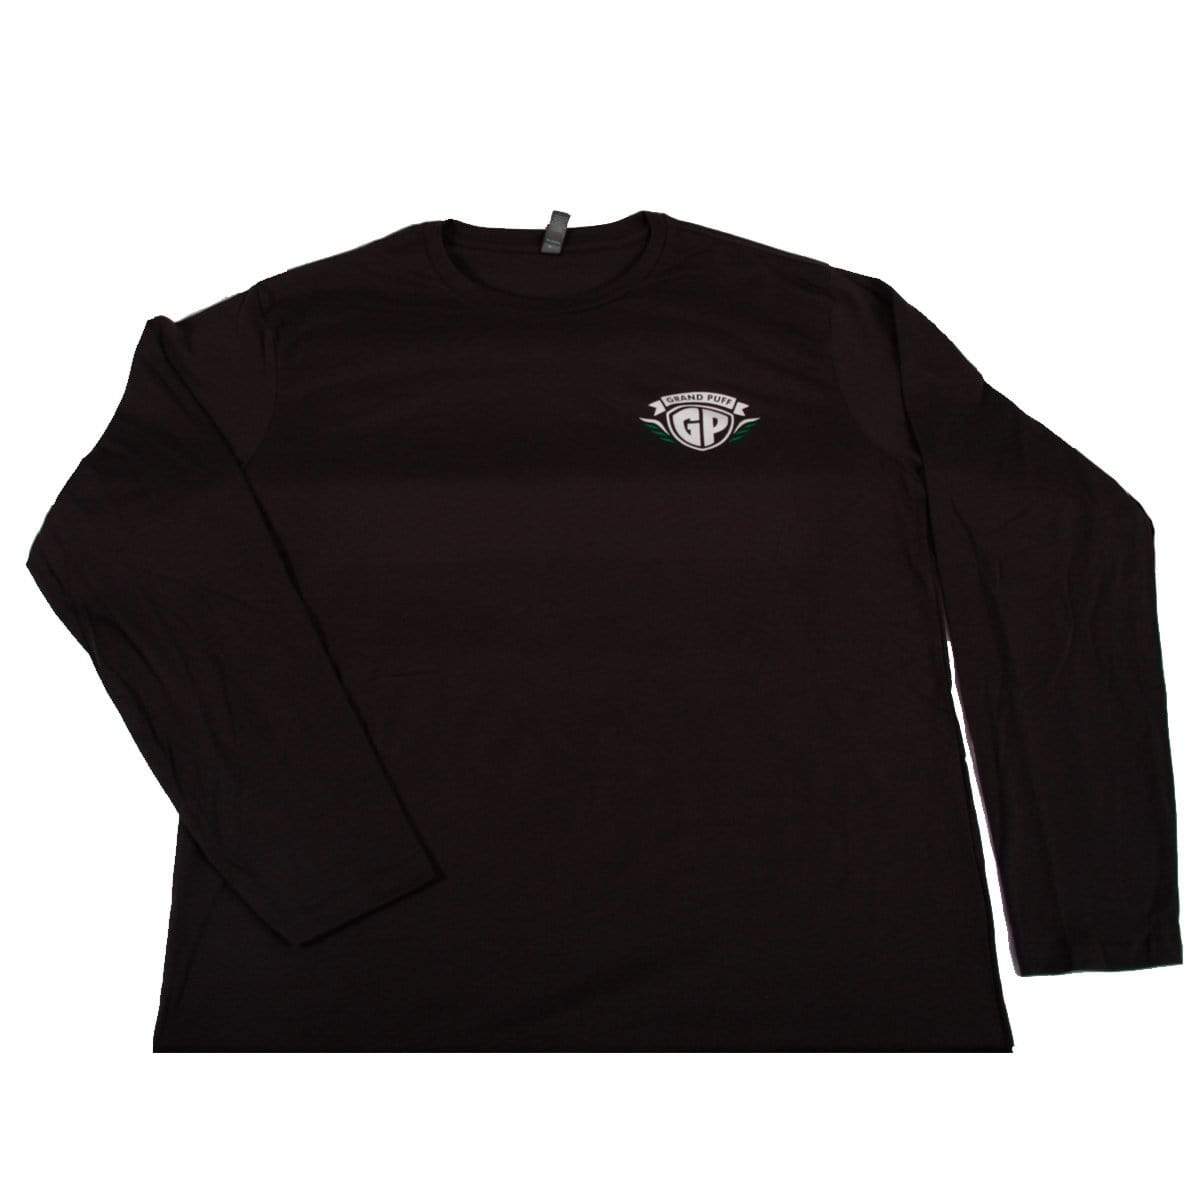 Grand Puff Sublimated Long Sleeve T-Shirt